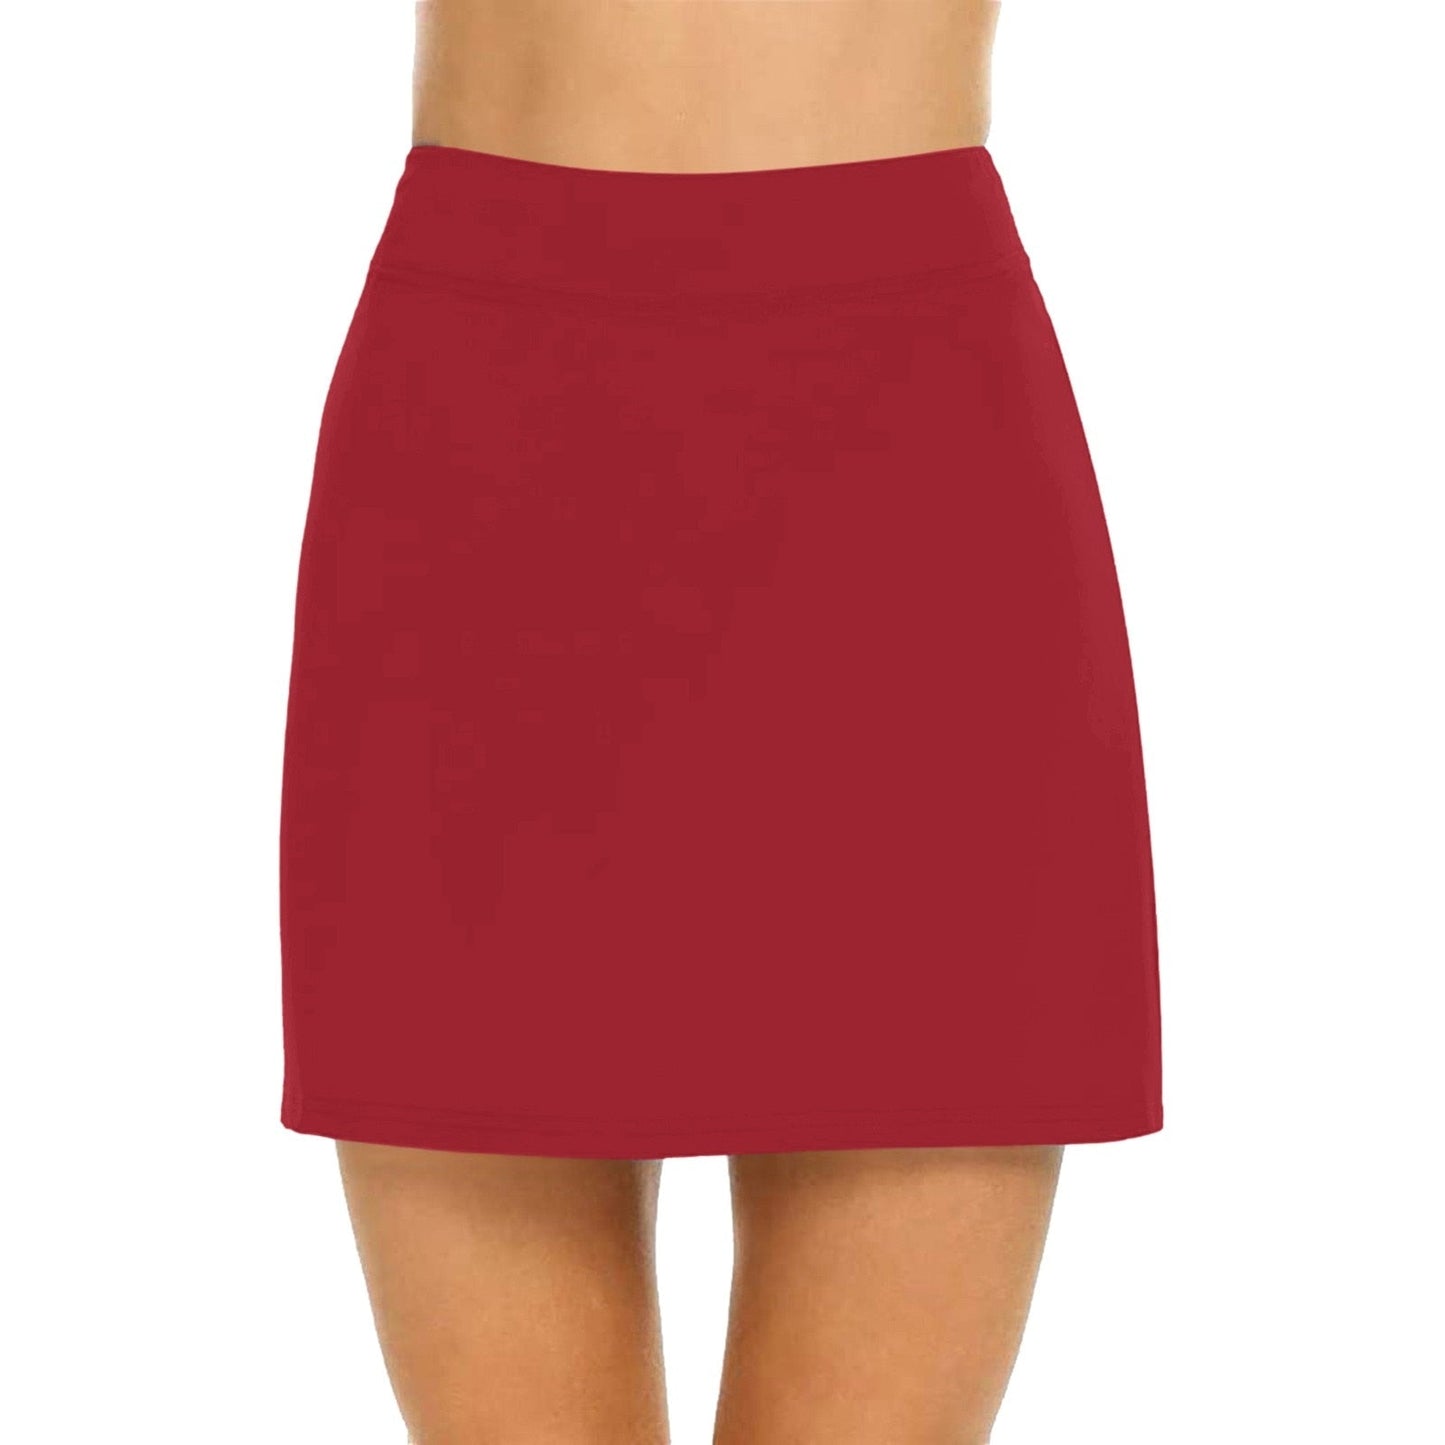 Breathable Solid Color Yoga Short Skirt